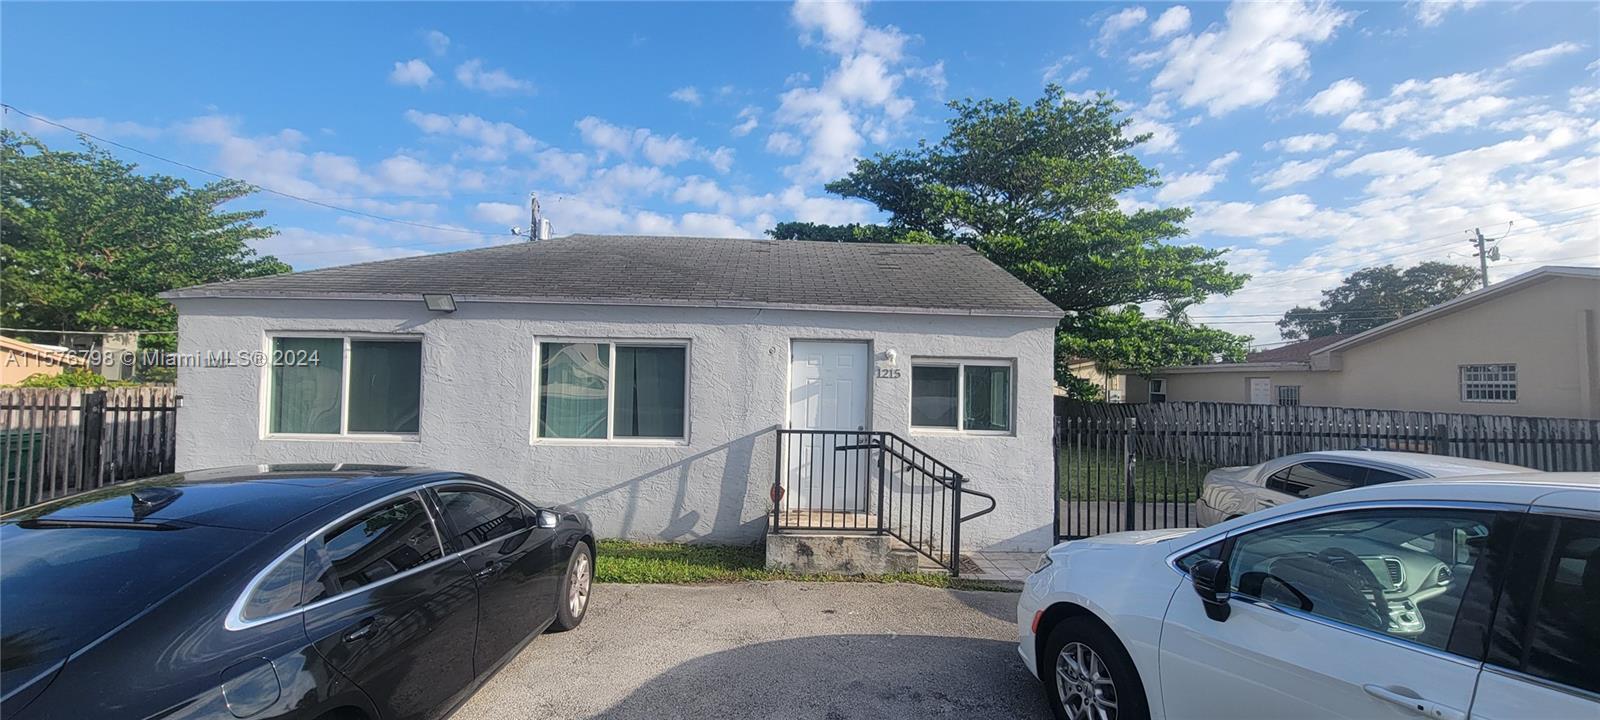 Photo of 1215 NW 100th St #1 in Miami, FL